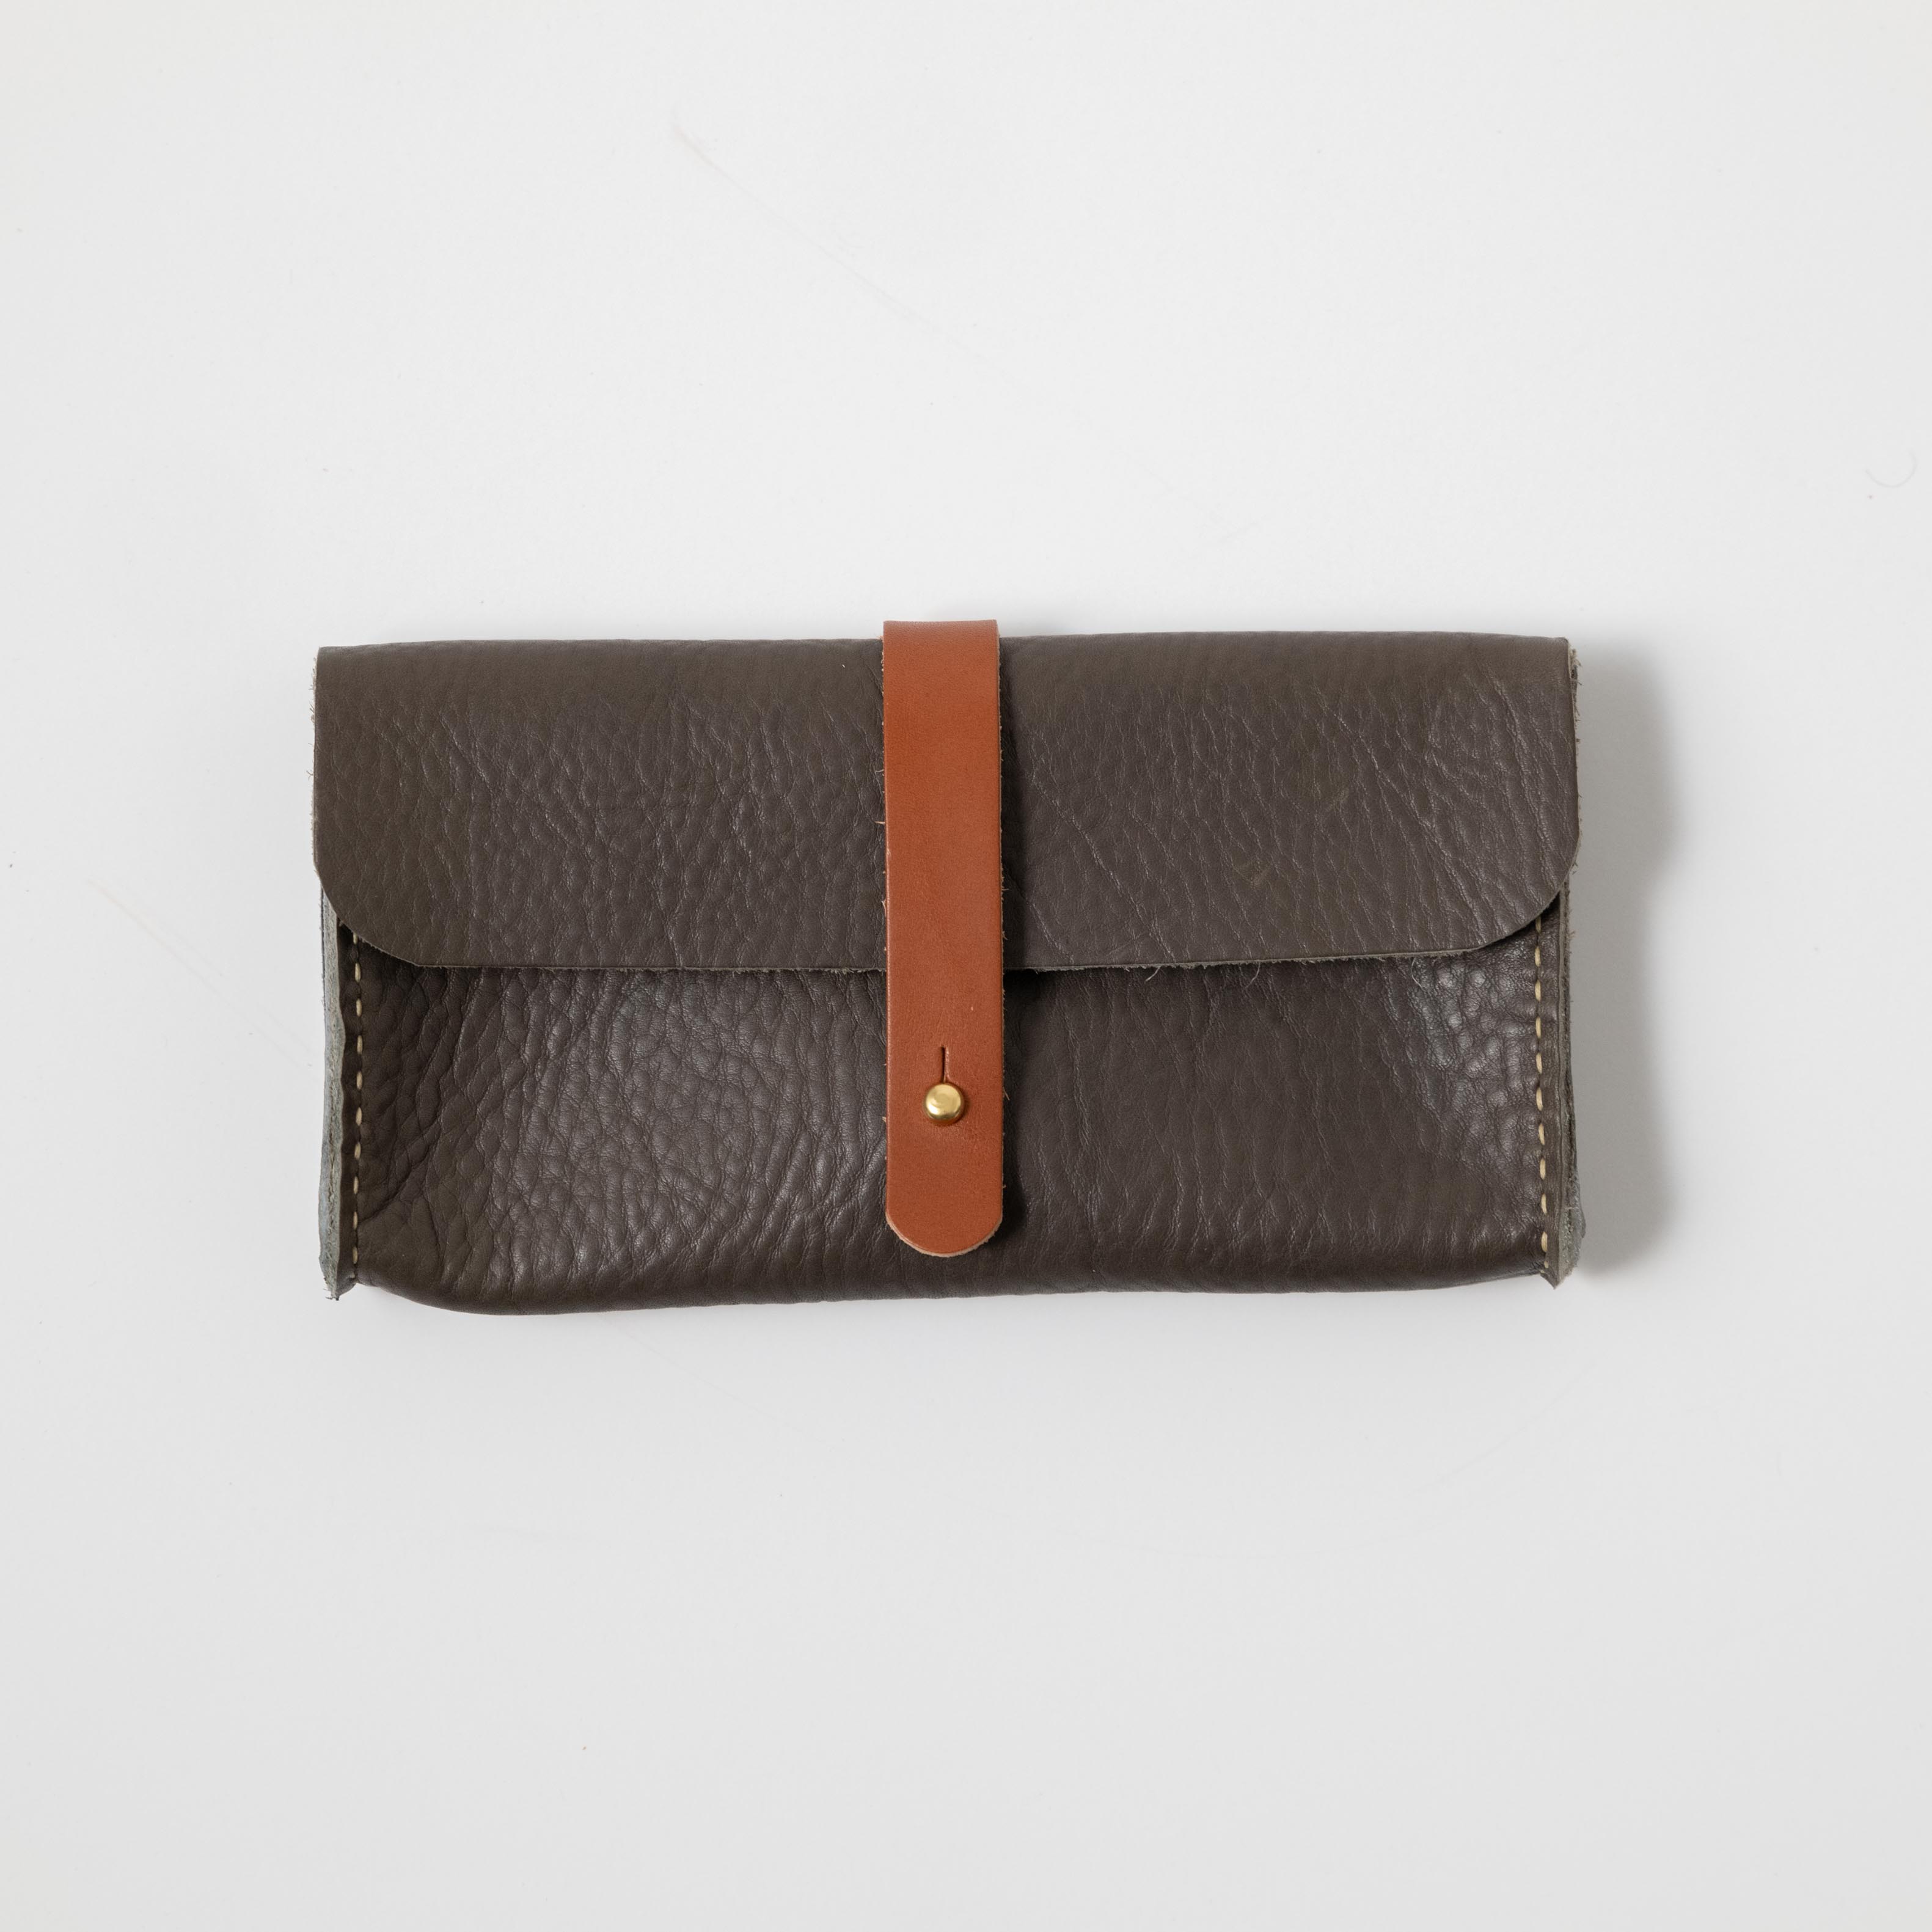 Wrinkle Leather Wooden Handle Clutch Crossbody Bag